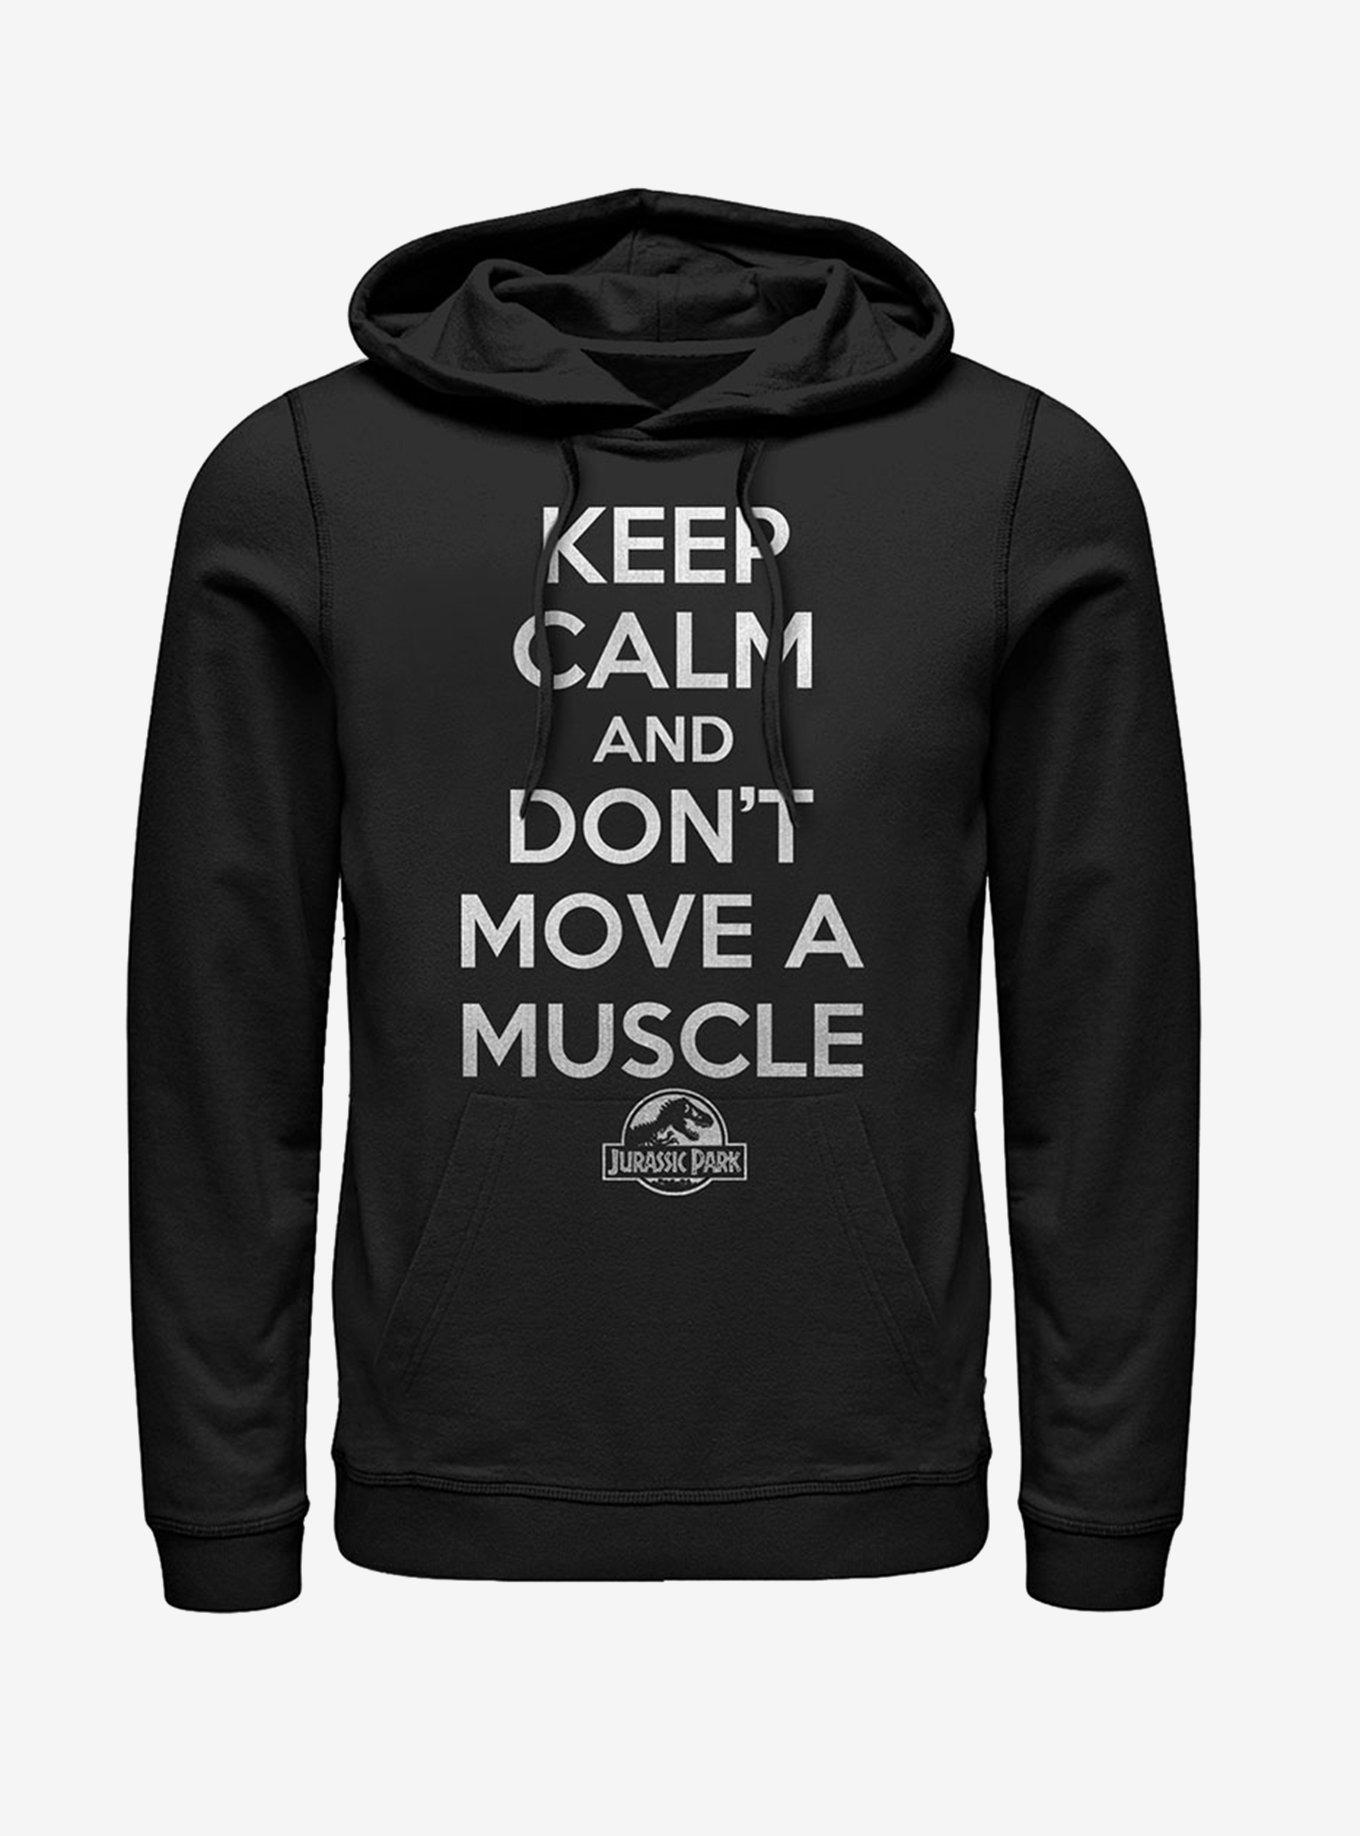 Keep Calm and Don't Move a Muscle Hoodie